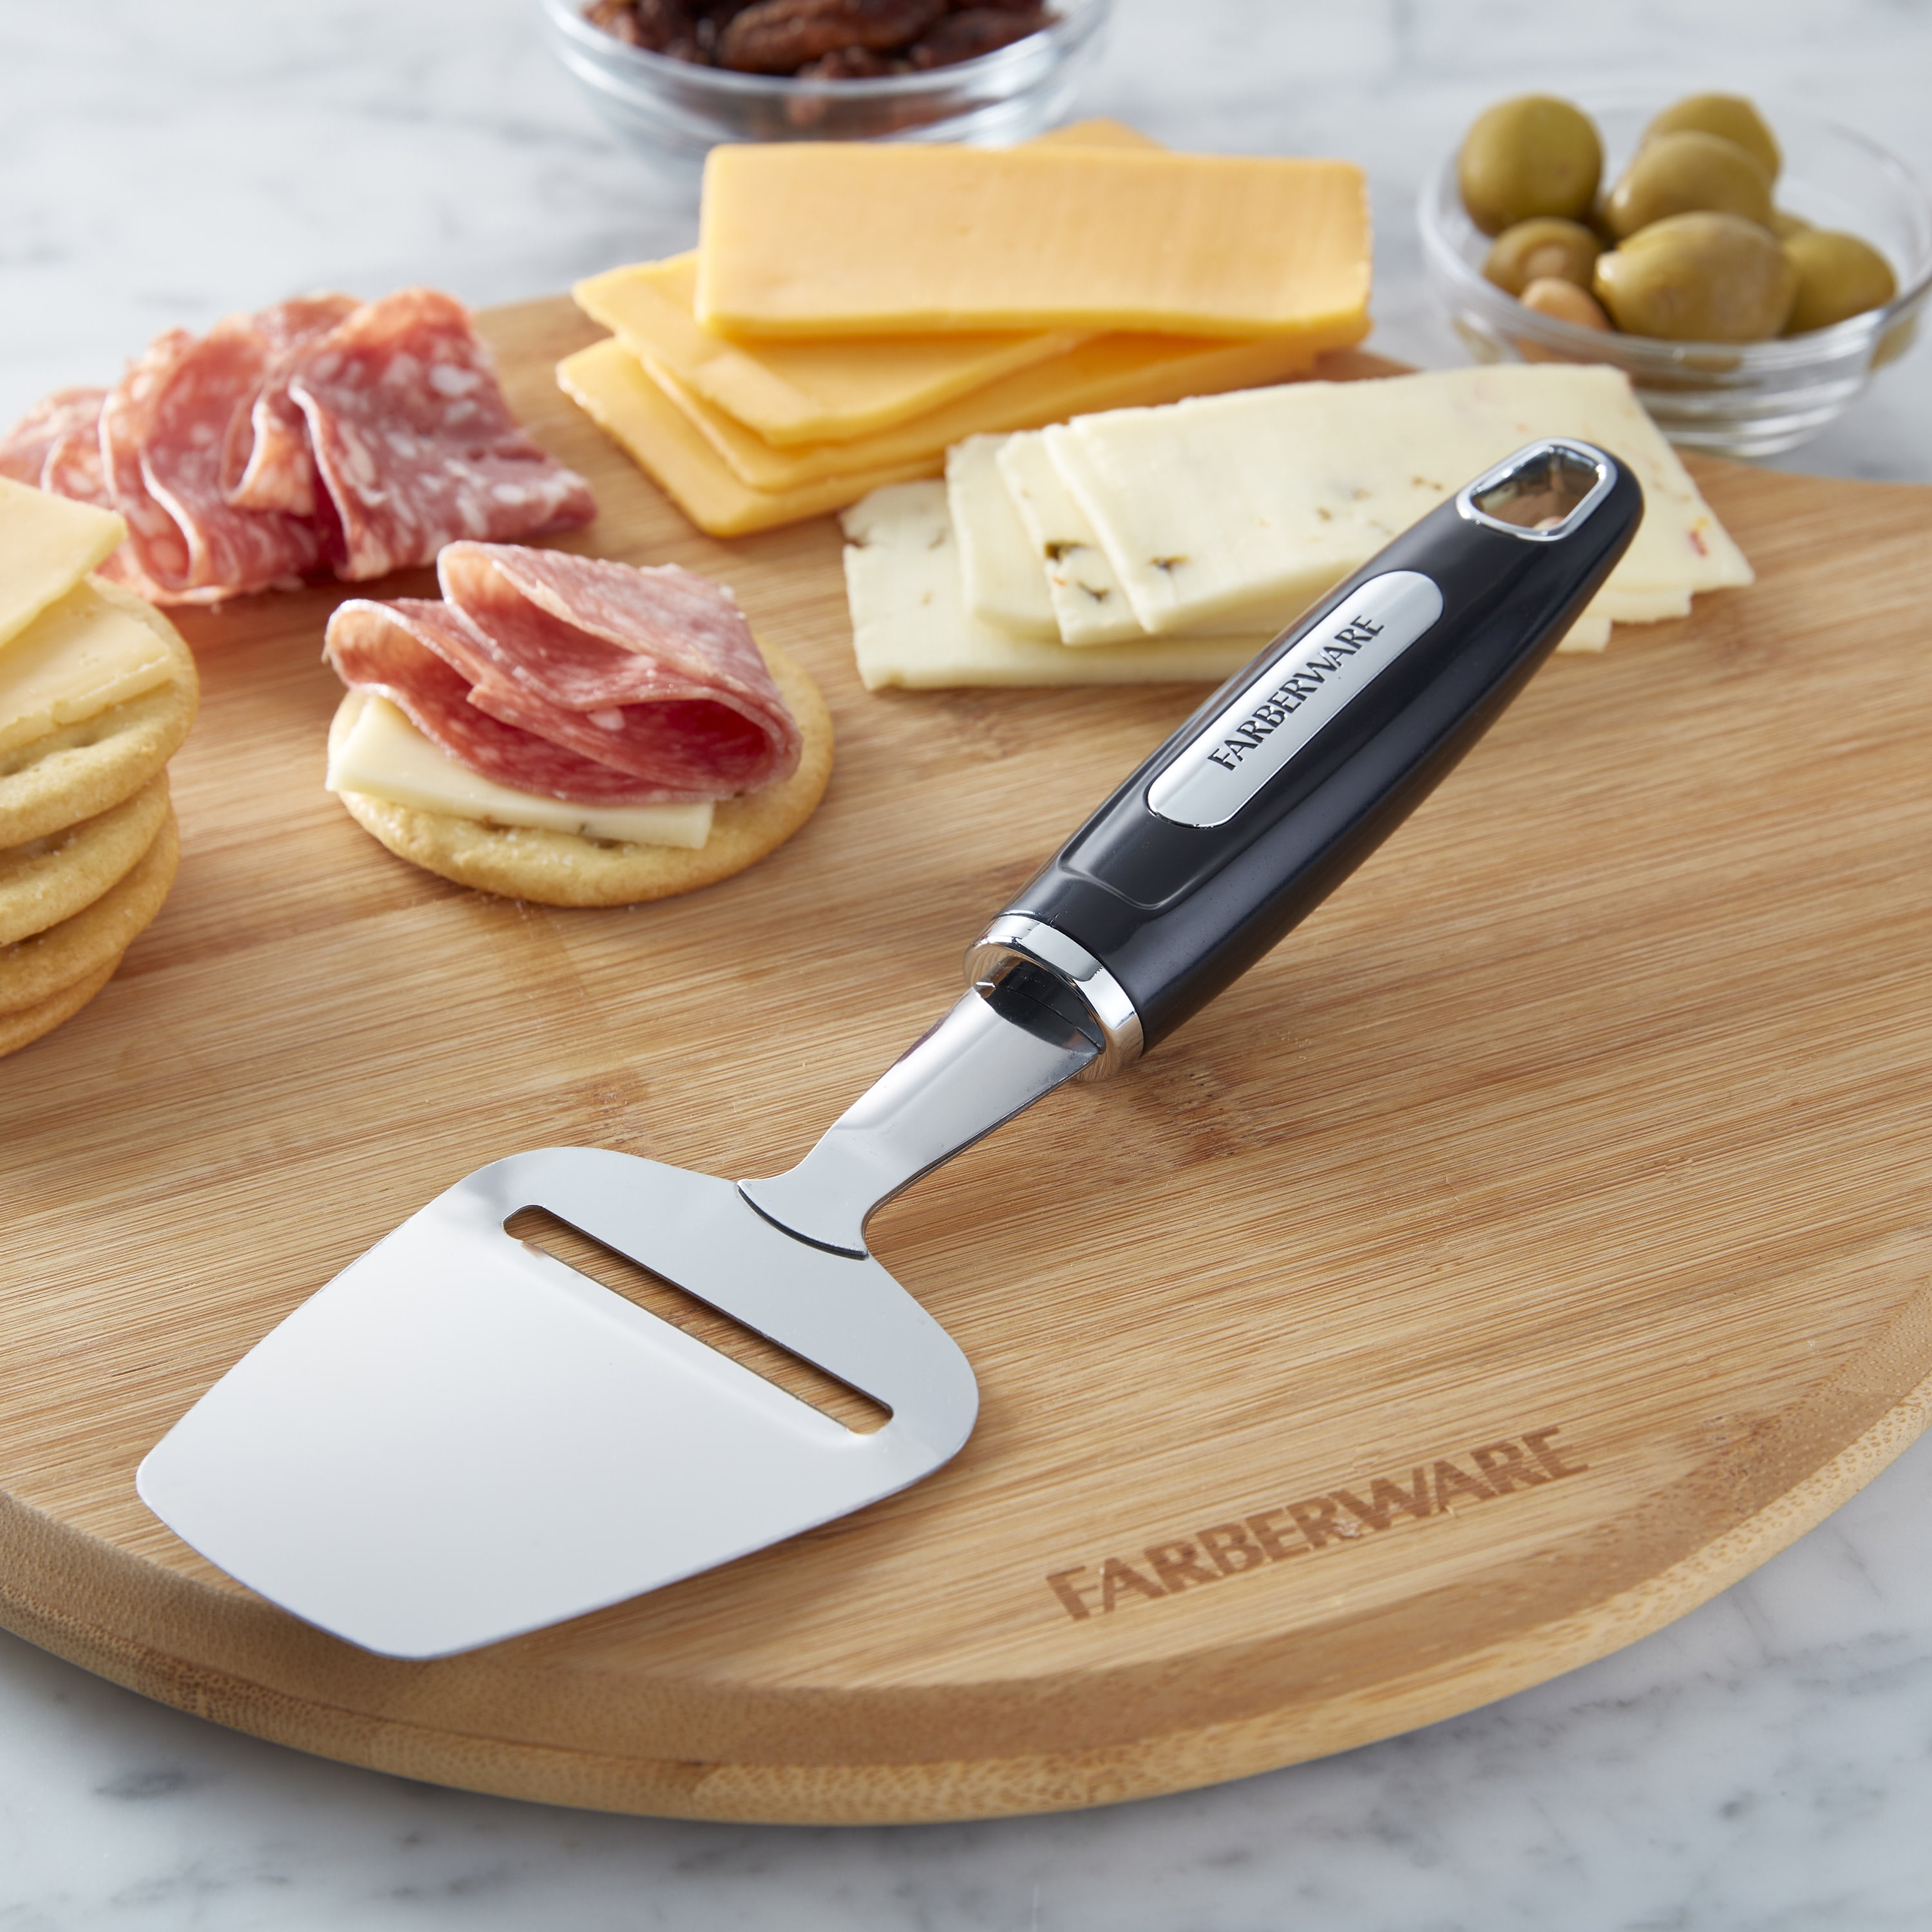 Stainless Steel 8.2 Inch Cheese Plane/Slicer/Server, Soft